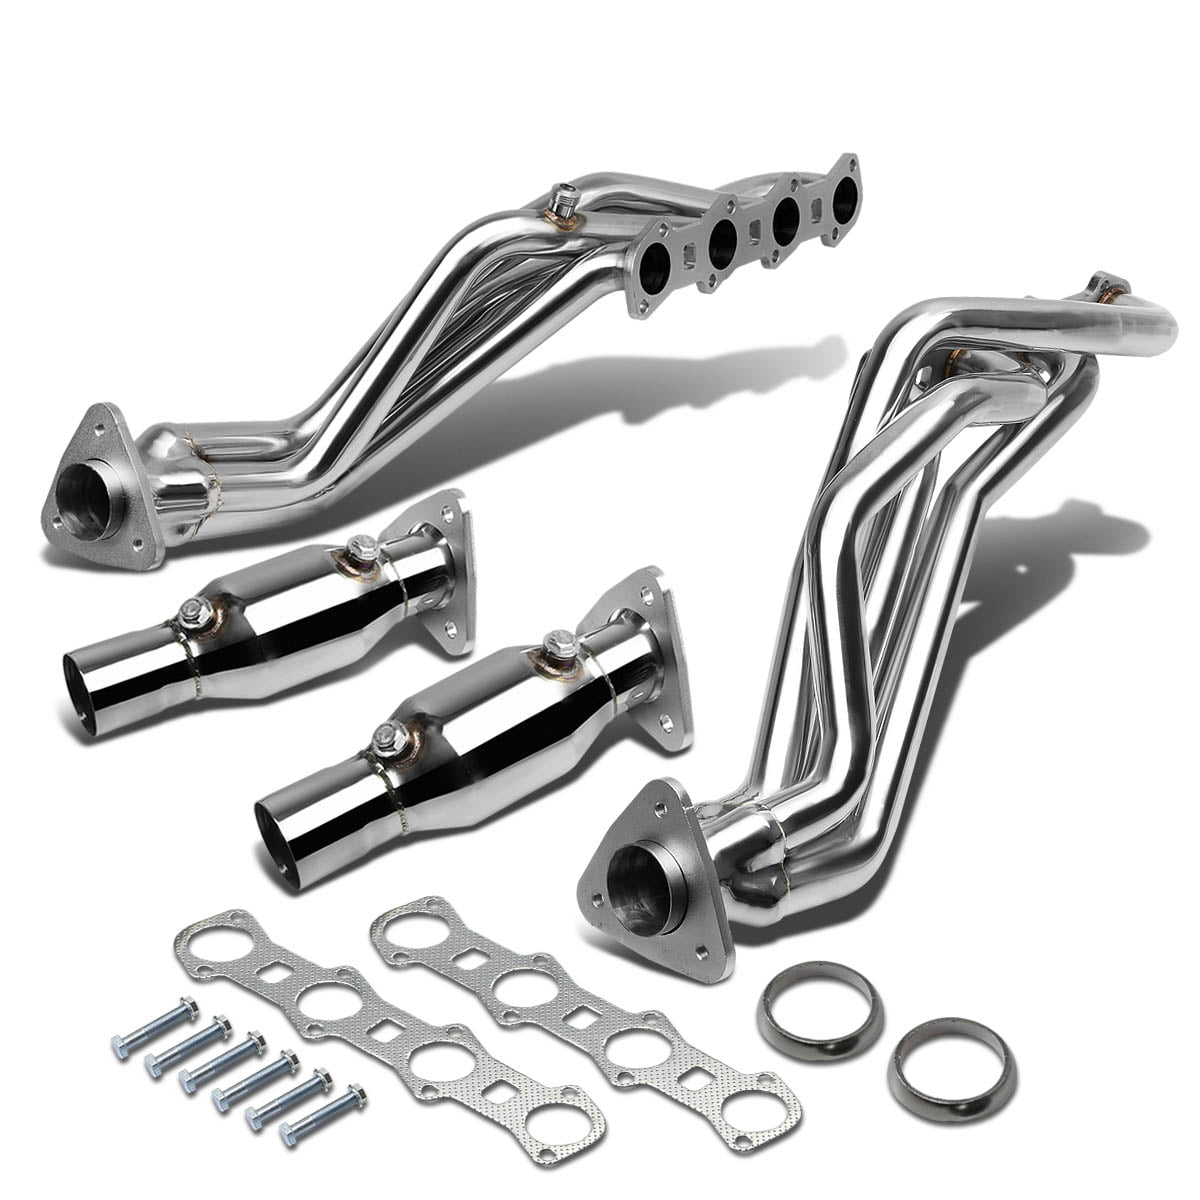 Y-Pipe Kit Compatible With 97-03 Ford F150/F250 Light Duty 5.4L Pickup Truck 4WD Model Only Black Performance Exhaust Headers 